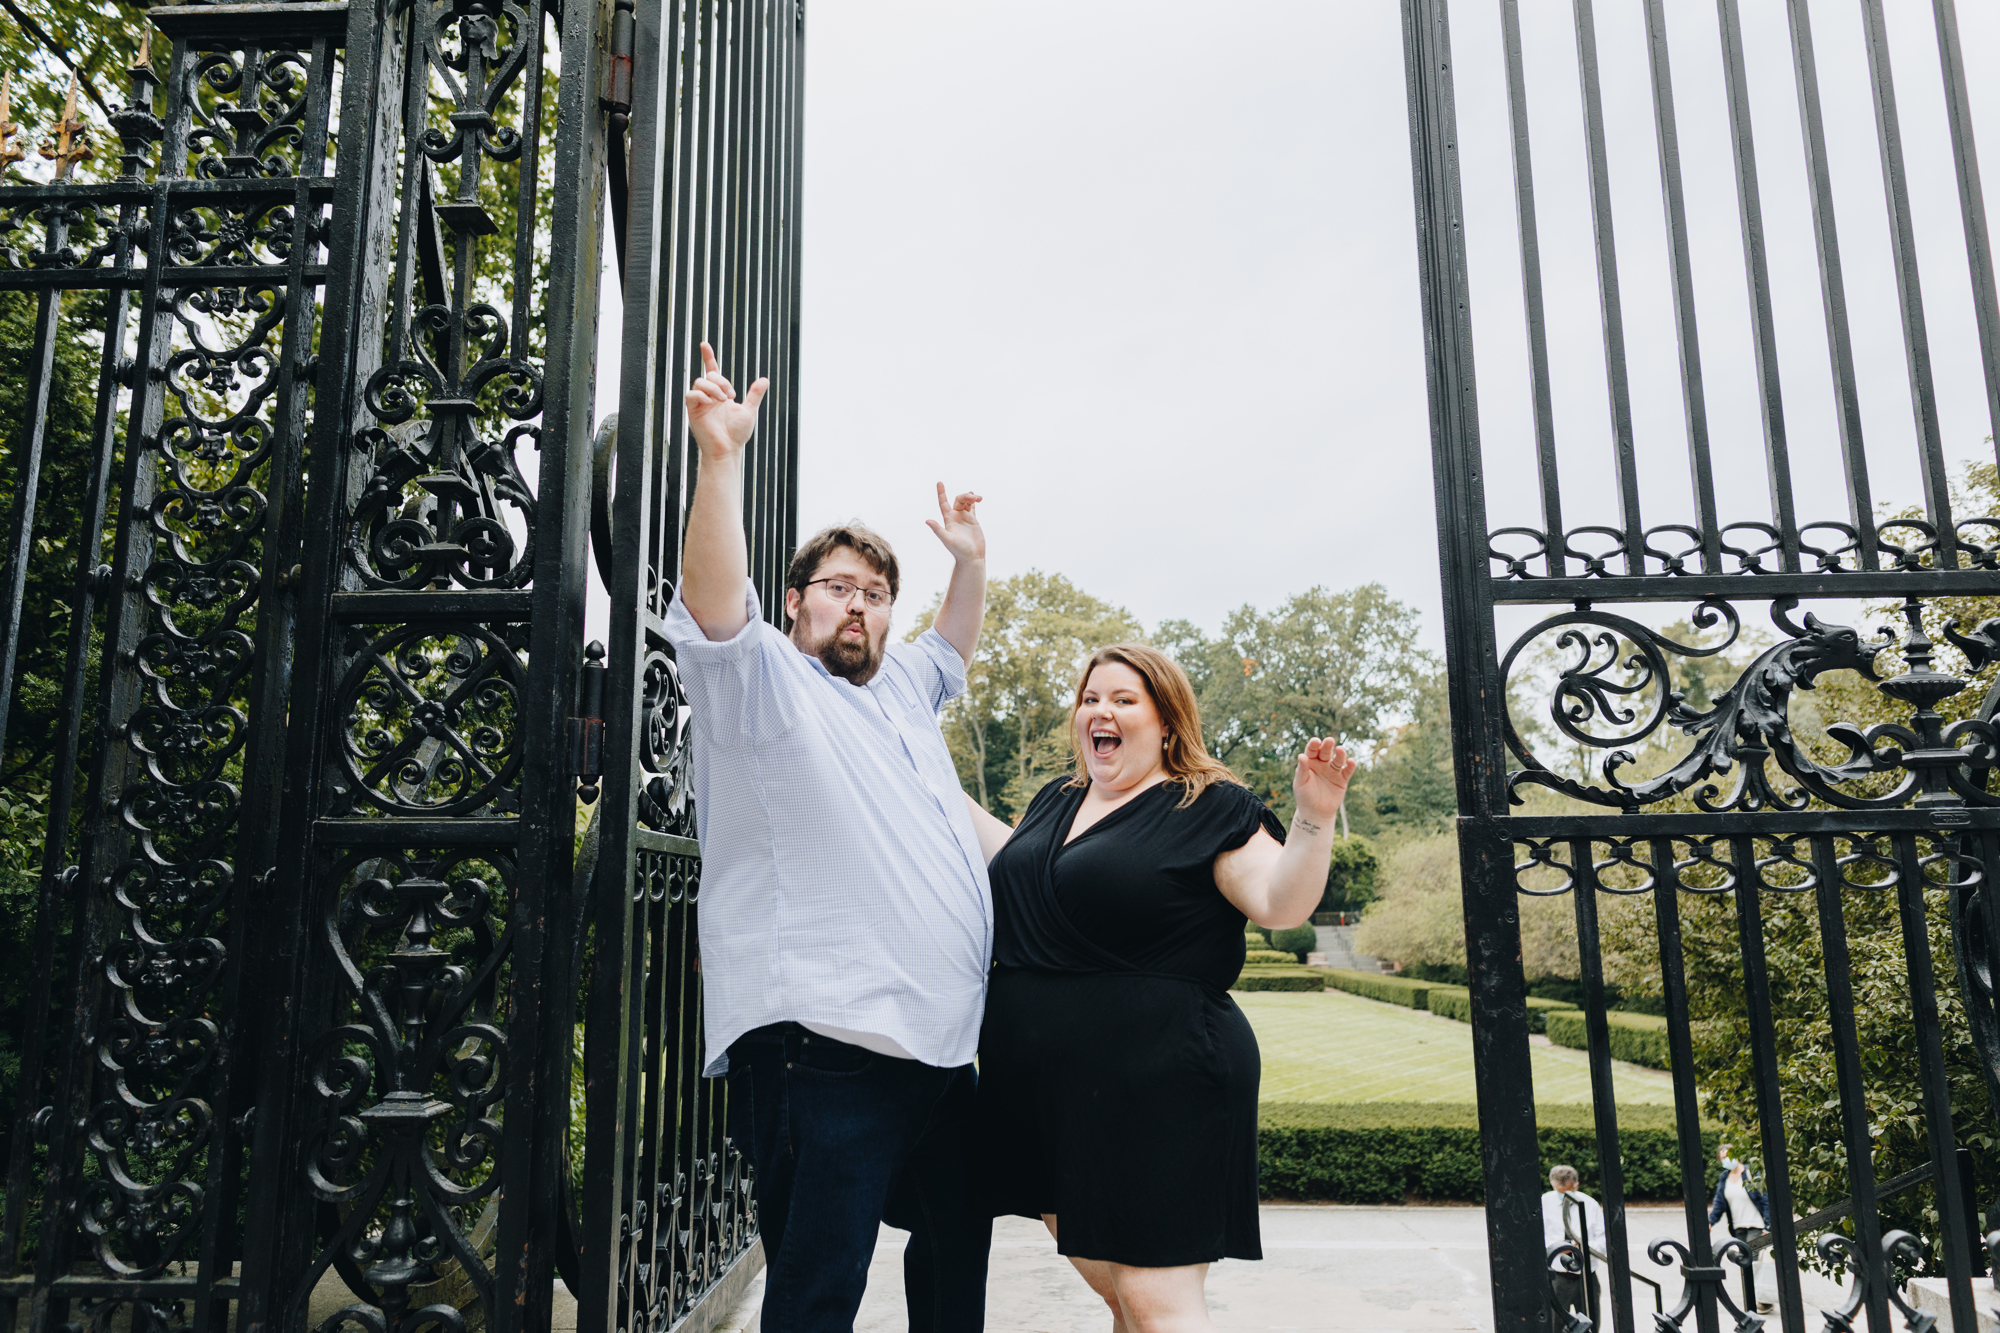 Funny Autumn Conservatory Garden Engagement Photography